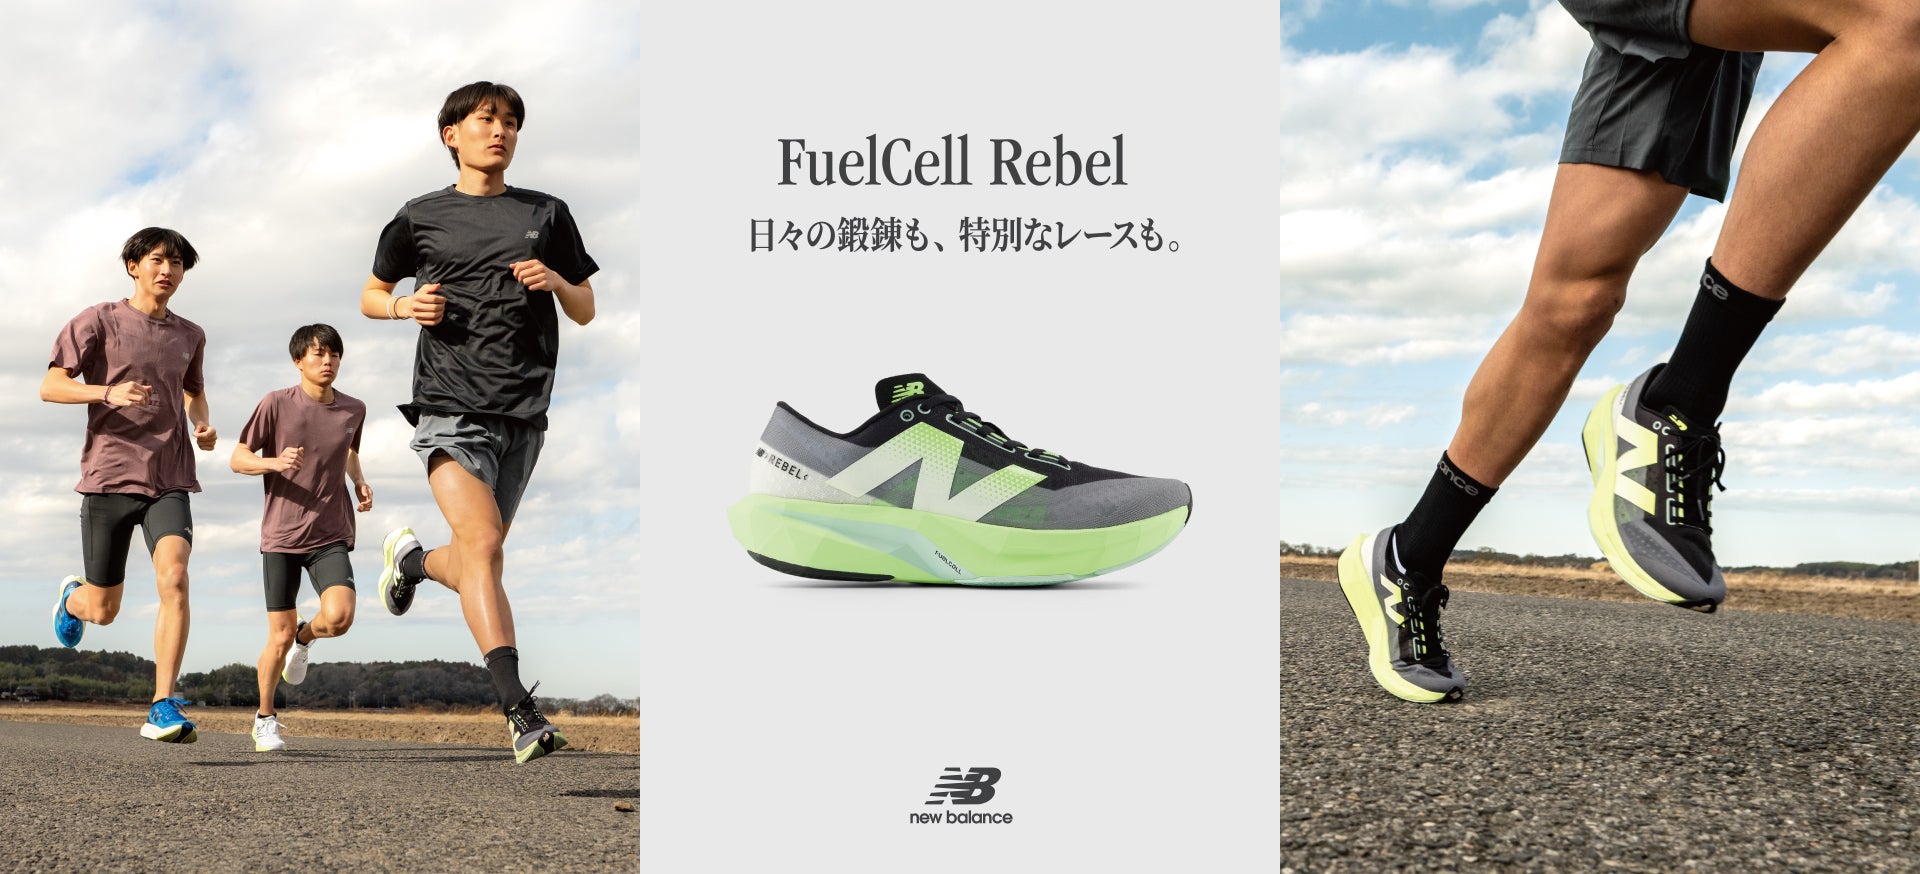 FuelCell Rebel For daily training and special races.